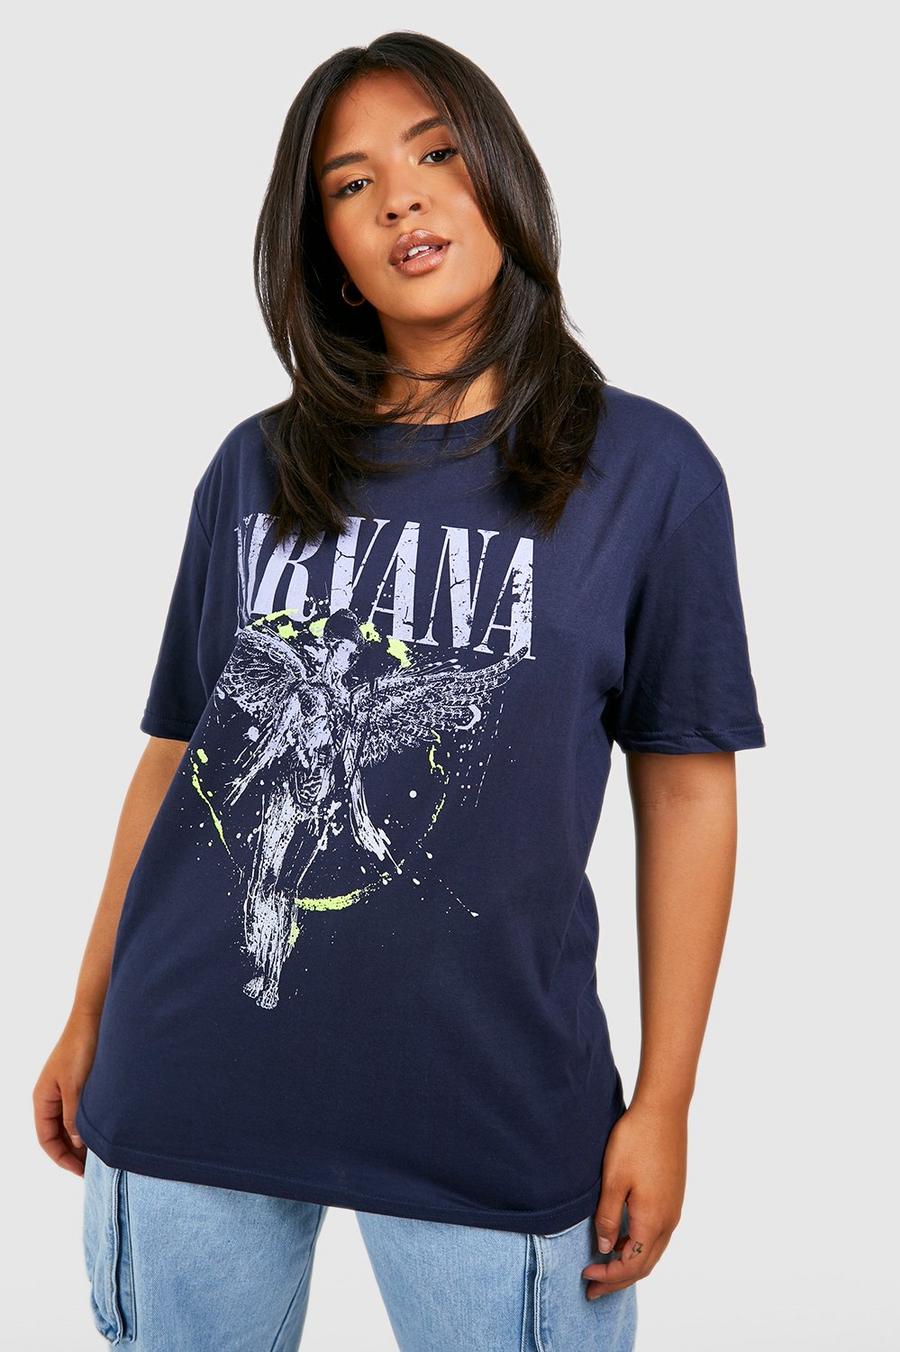 T-shirt Plus Size dei Nirvana in colori fluo, Navy blu oltremare image number 1